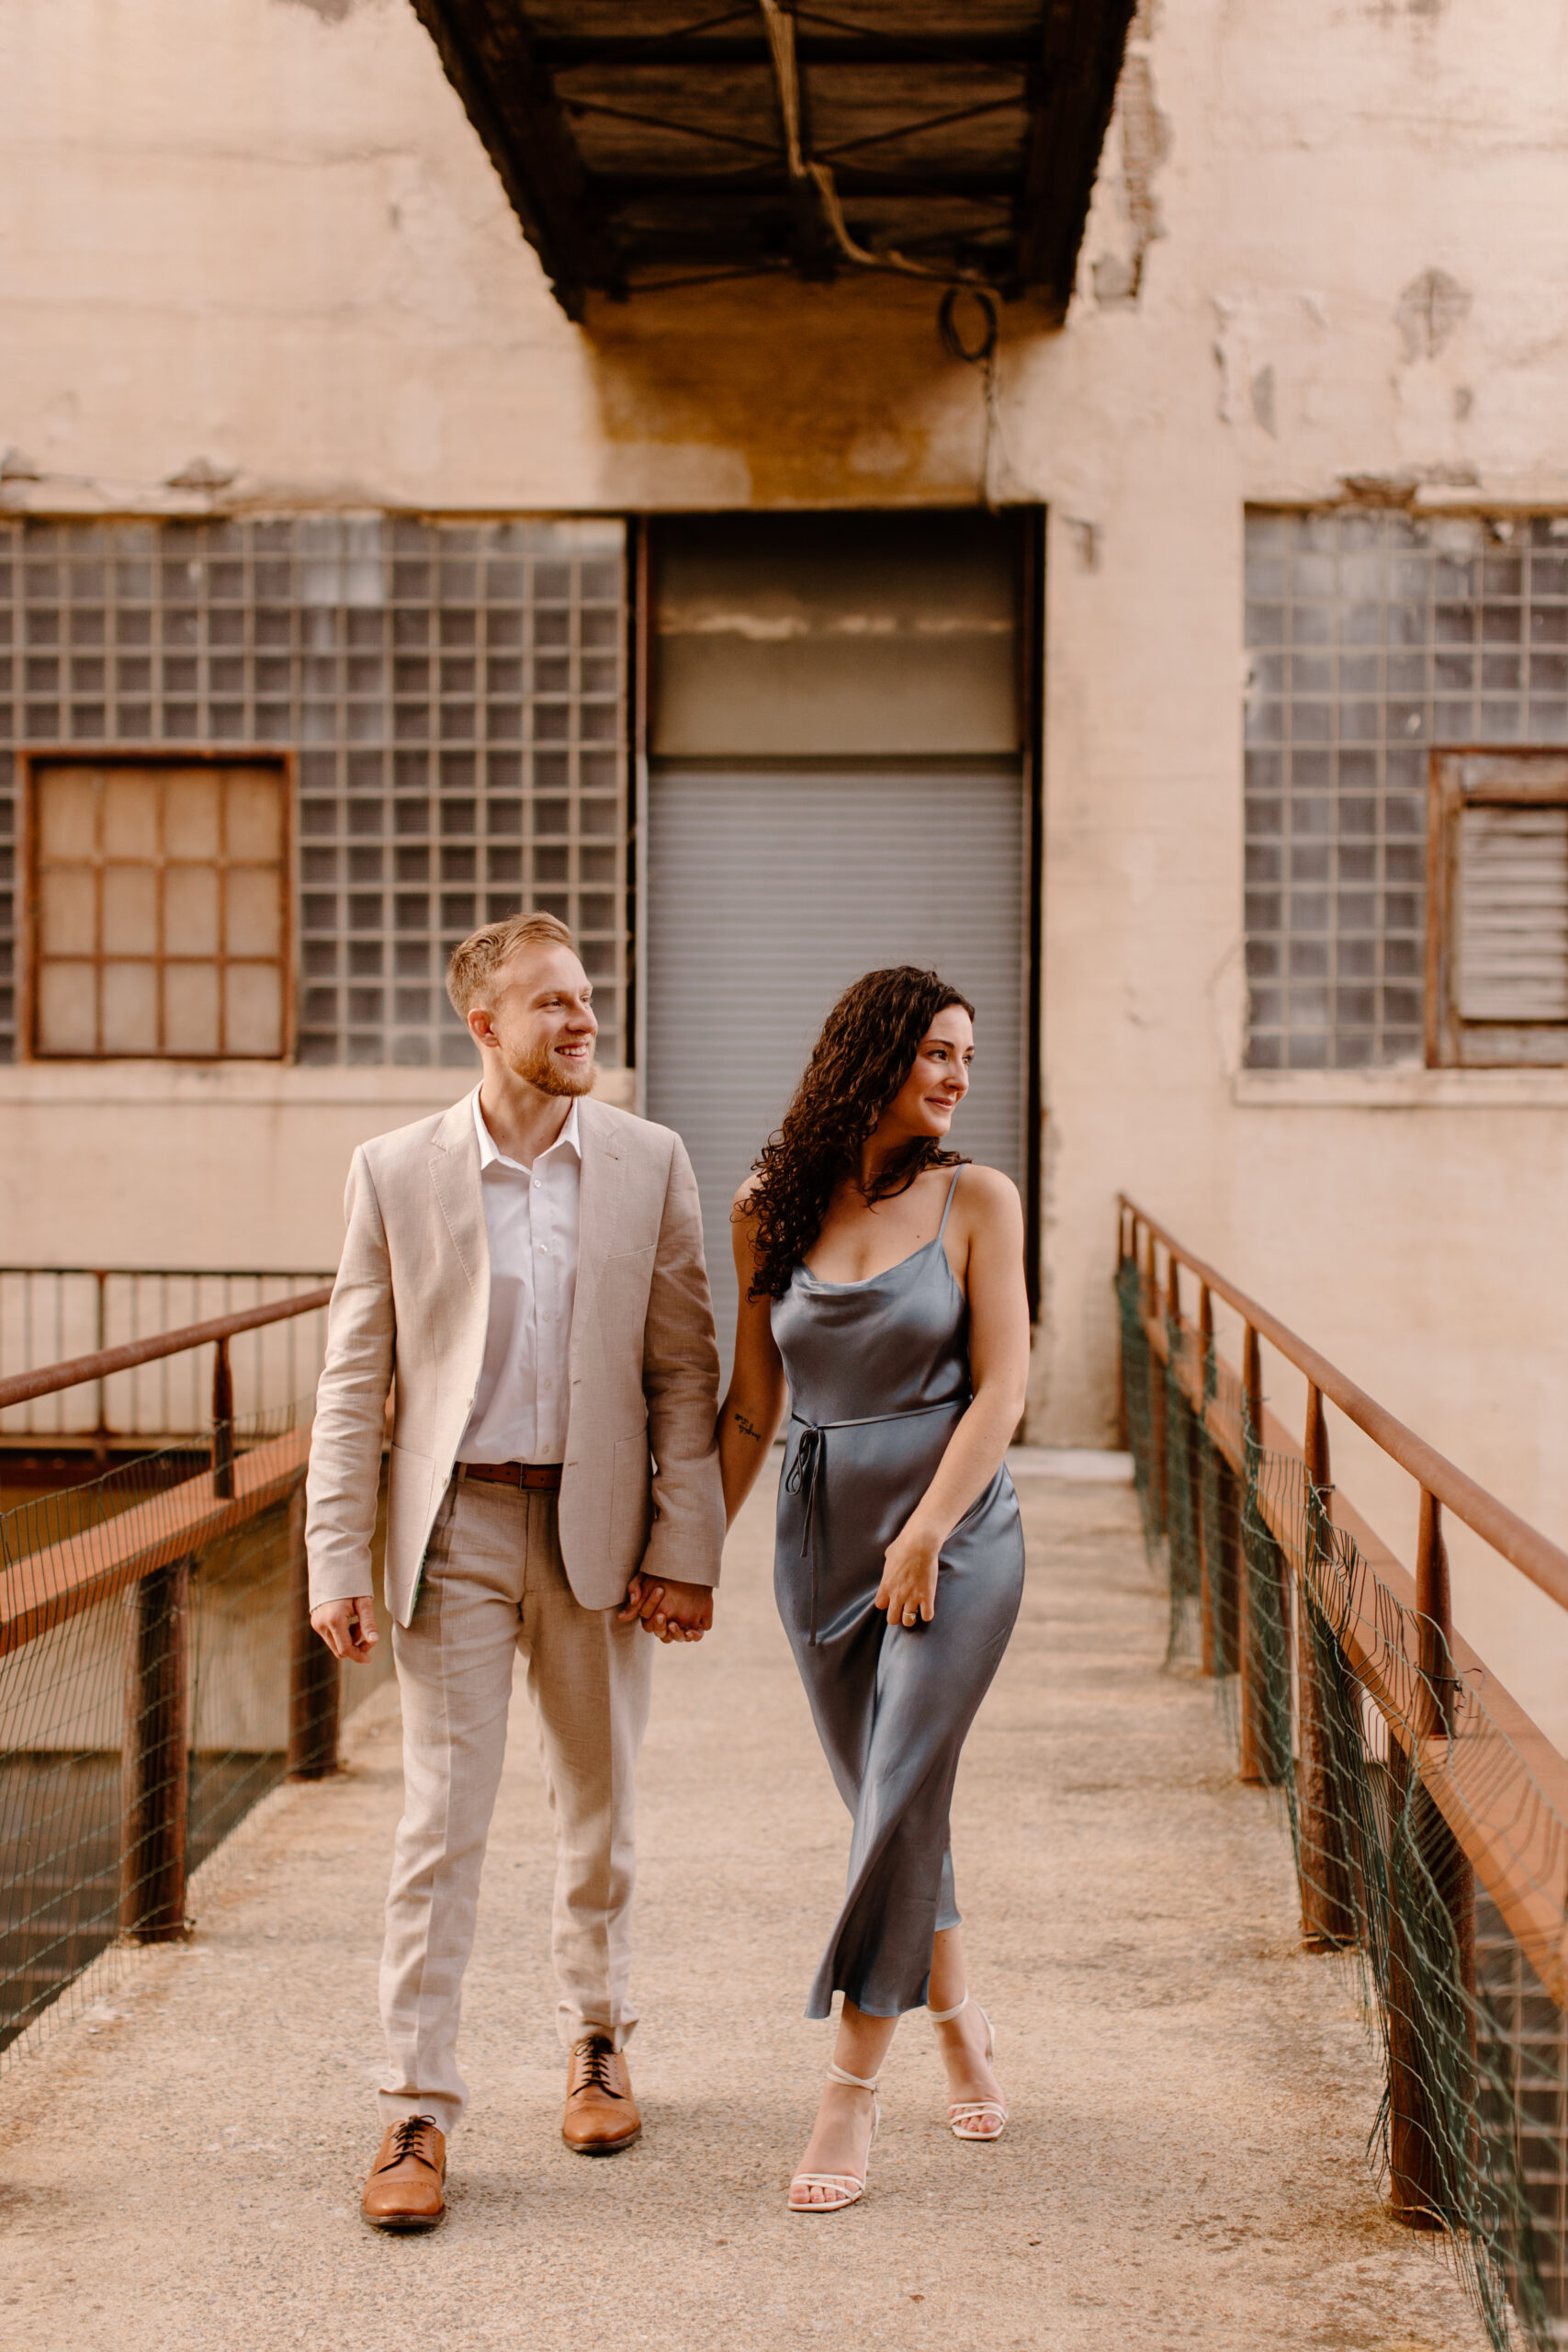 An engaged couple walking through Clipper Mill, Baltimore holding hands.